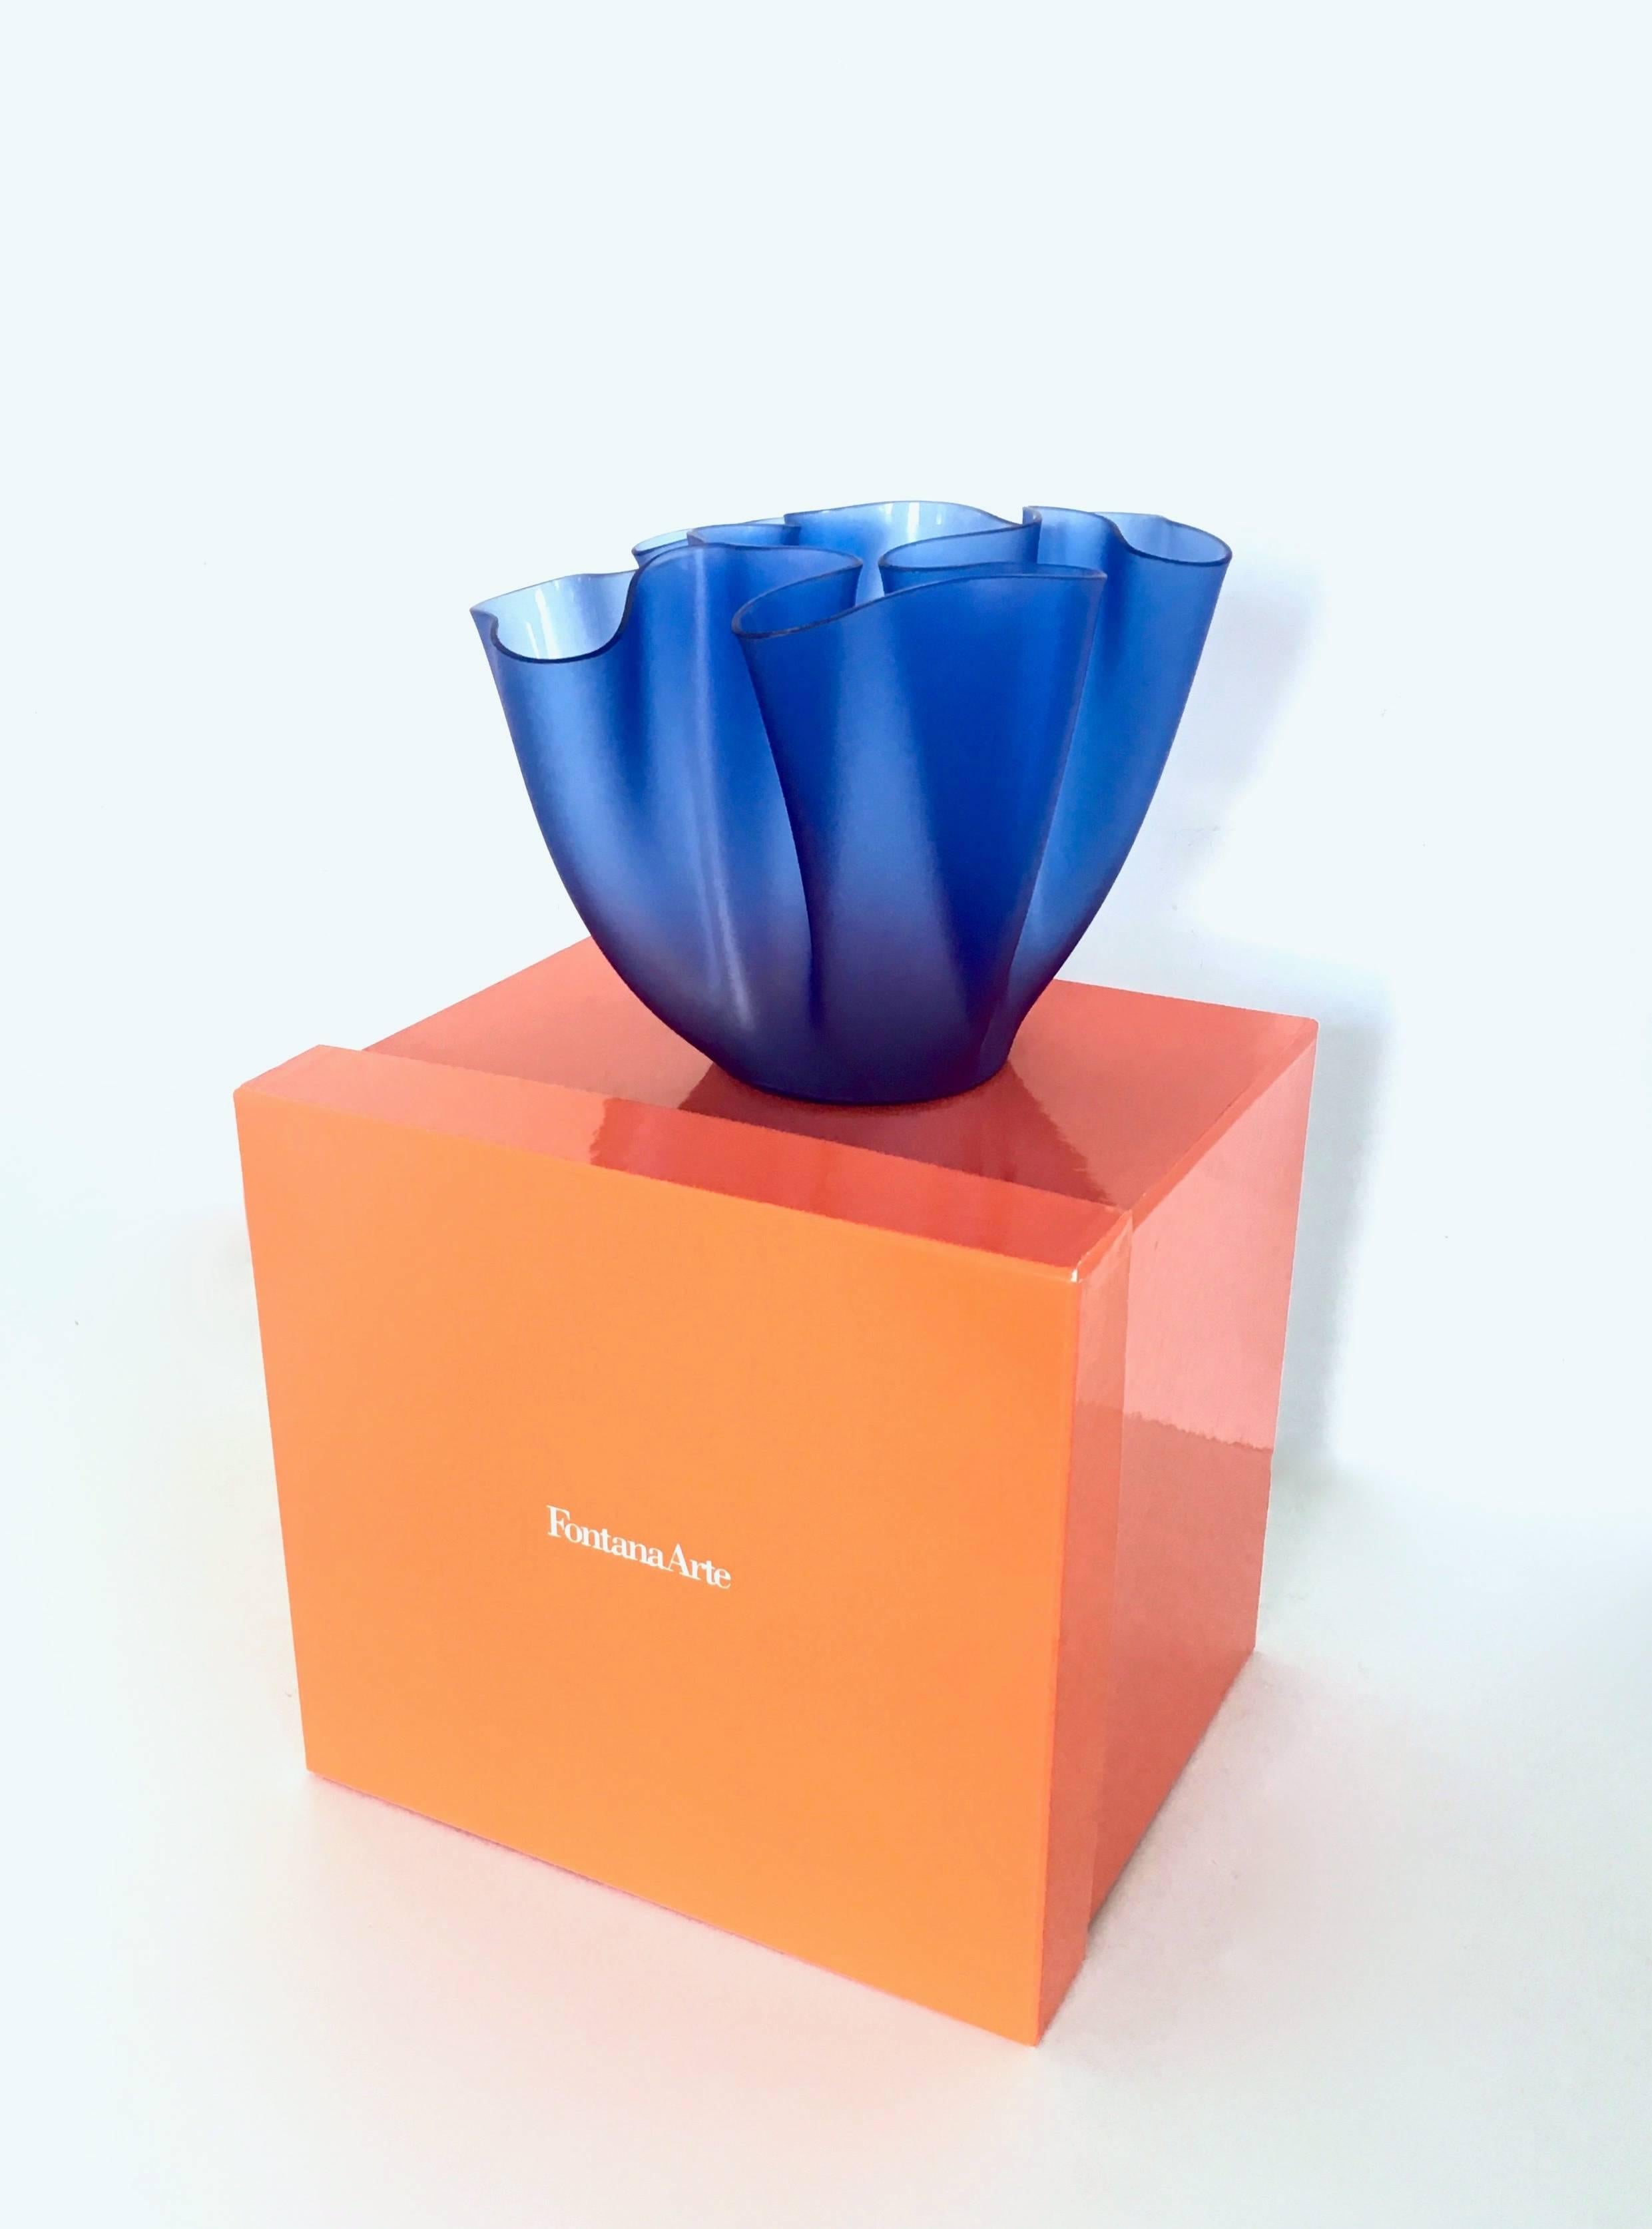 This is a rare and decorative vase designed by Pietro Chiesa in 1932 and manufactured by Fontana Arte.
It is made of etched glass and has a very nice ‘Cartoccio’ (paper bag) shape.
Since the manufacturing process of these vases was manual, each